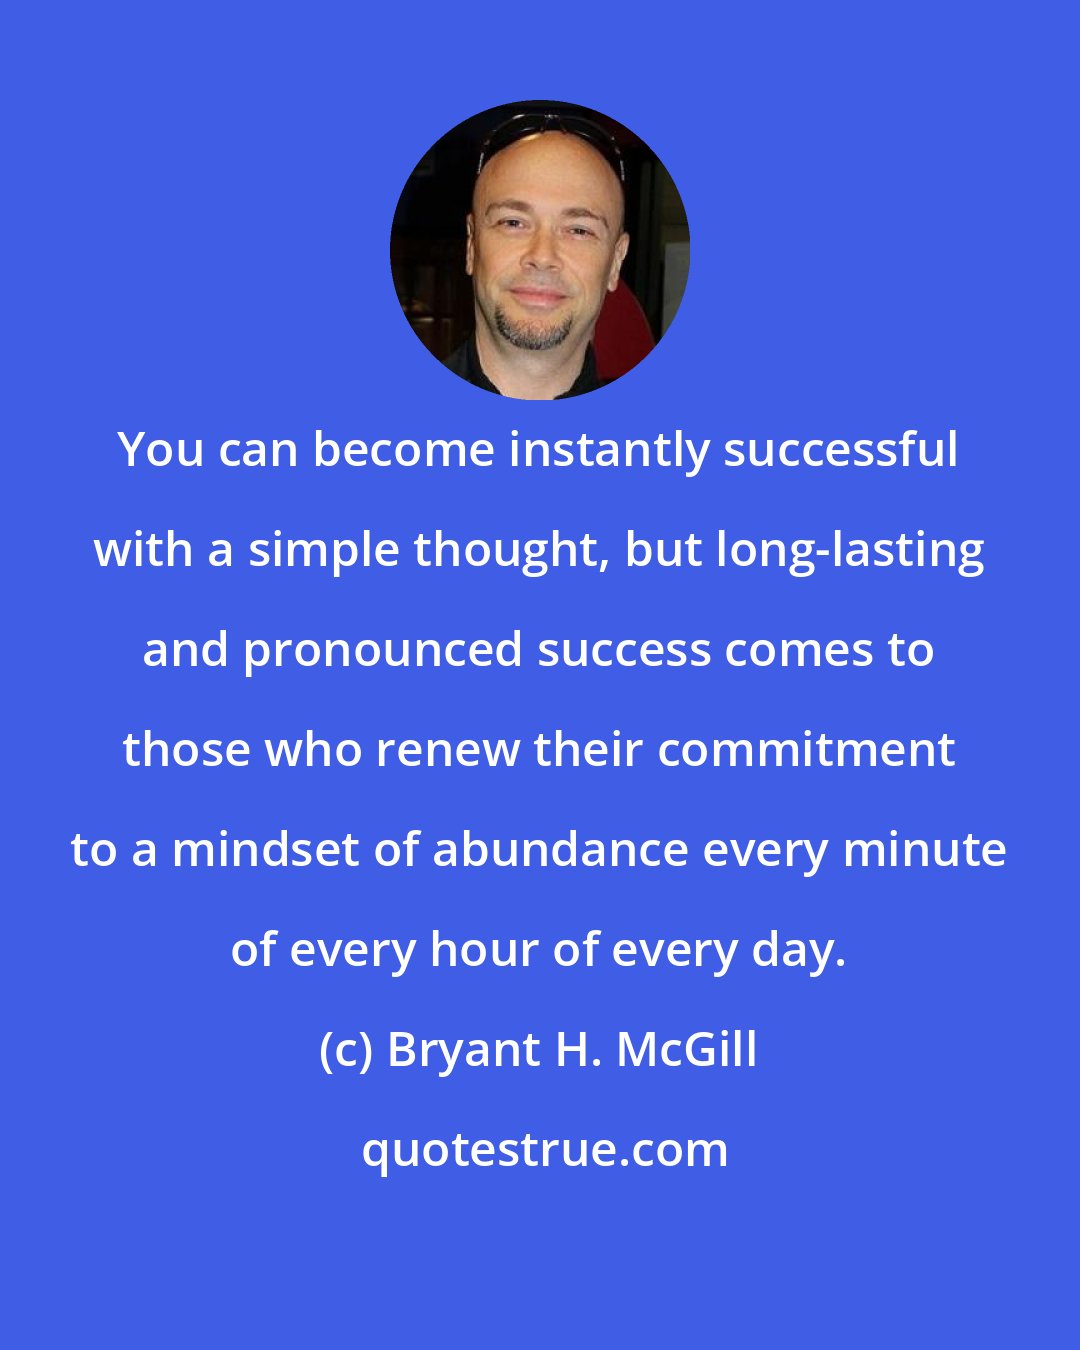 Bryant H. McGill: You can become instantly successful with a simple thought, but long-lasting and pronounced success comes to those who renew their commitment to a mindset of abundance every minute of every hour of every day.